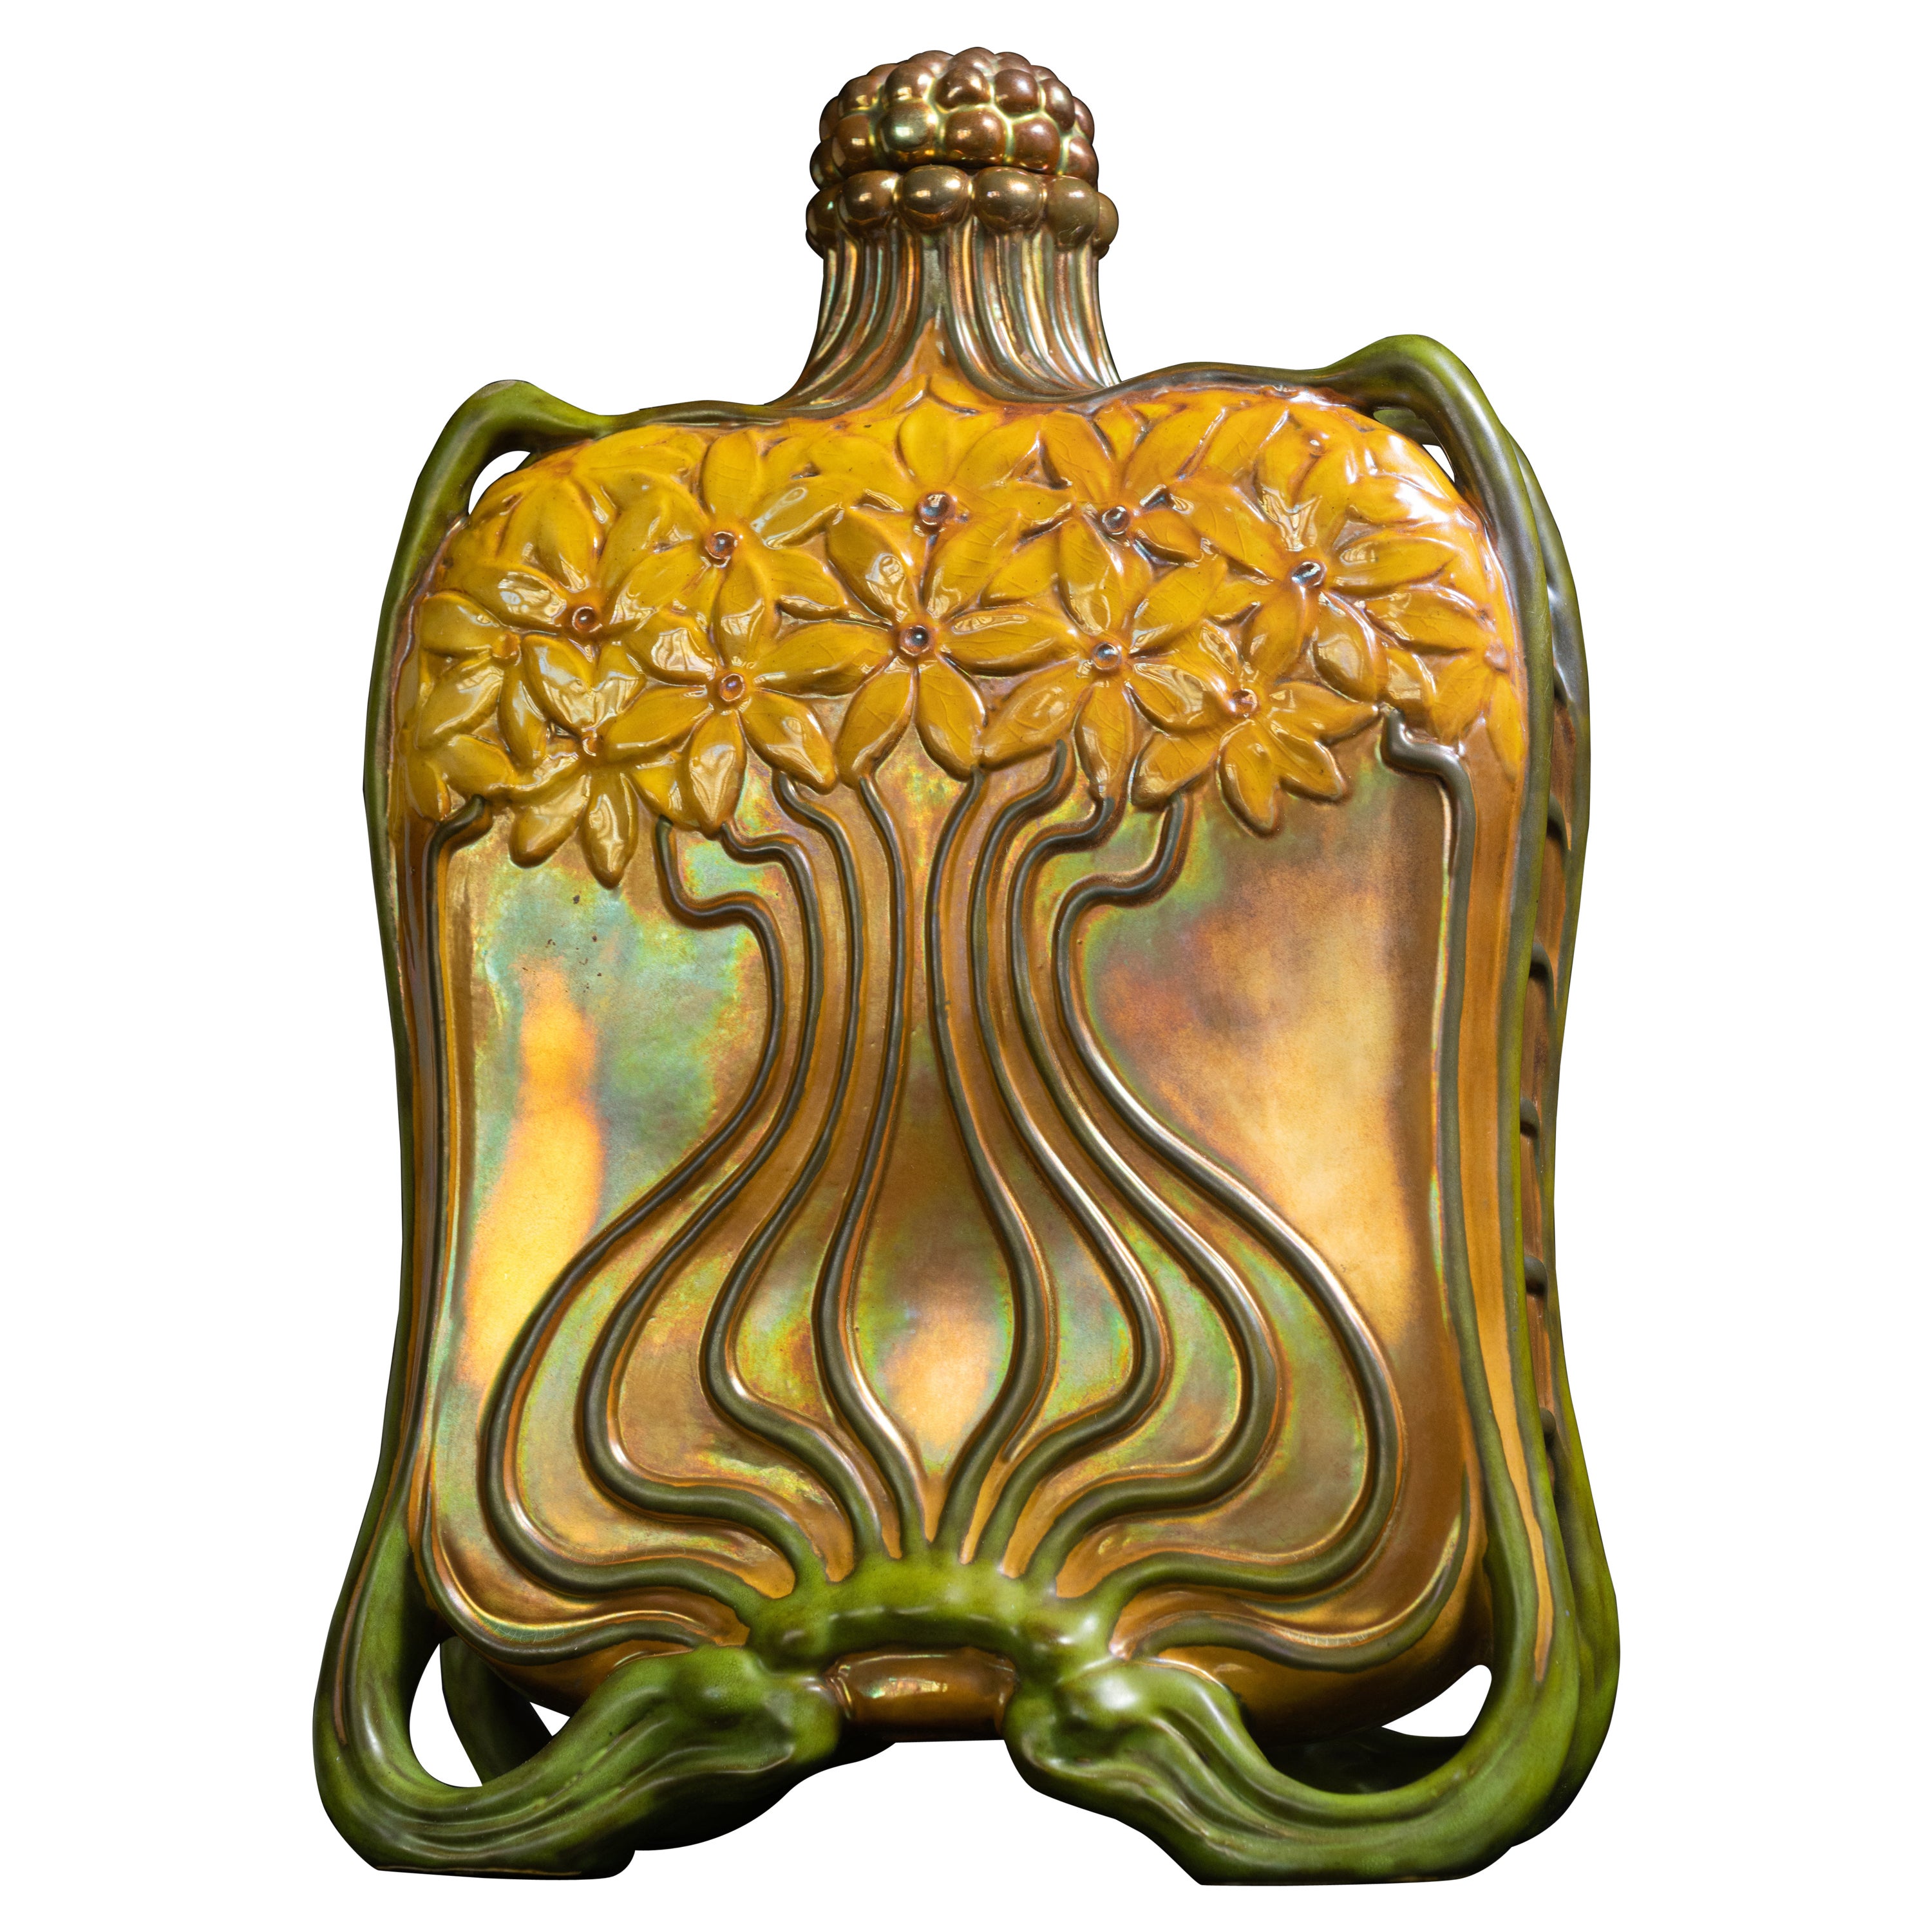 Important Art Nouveau Zsolnay Flask by Lajos Mack for Zsolnay